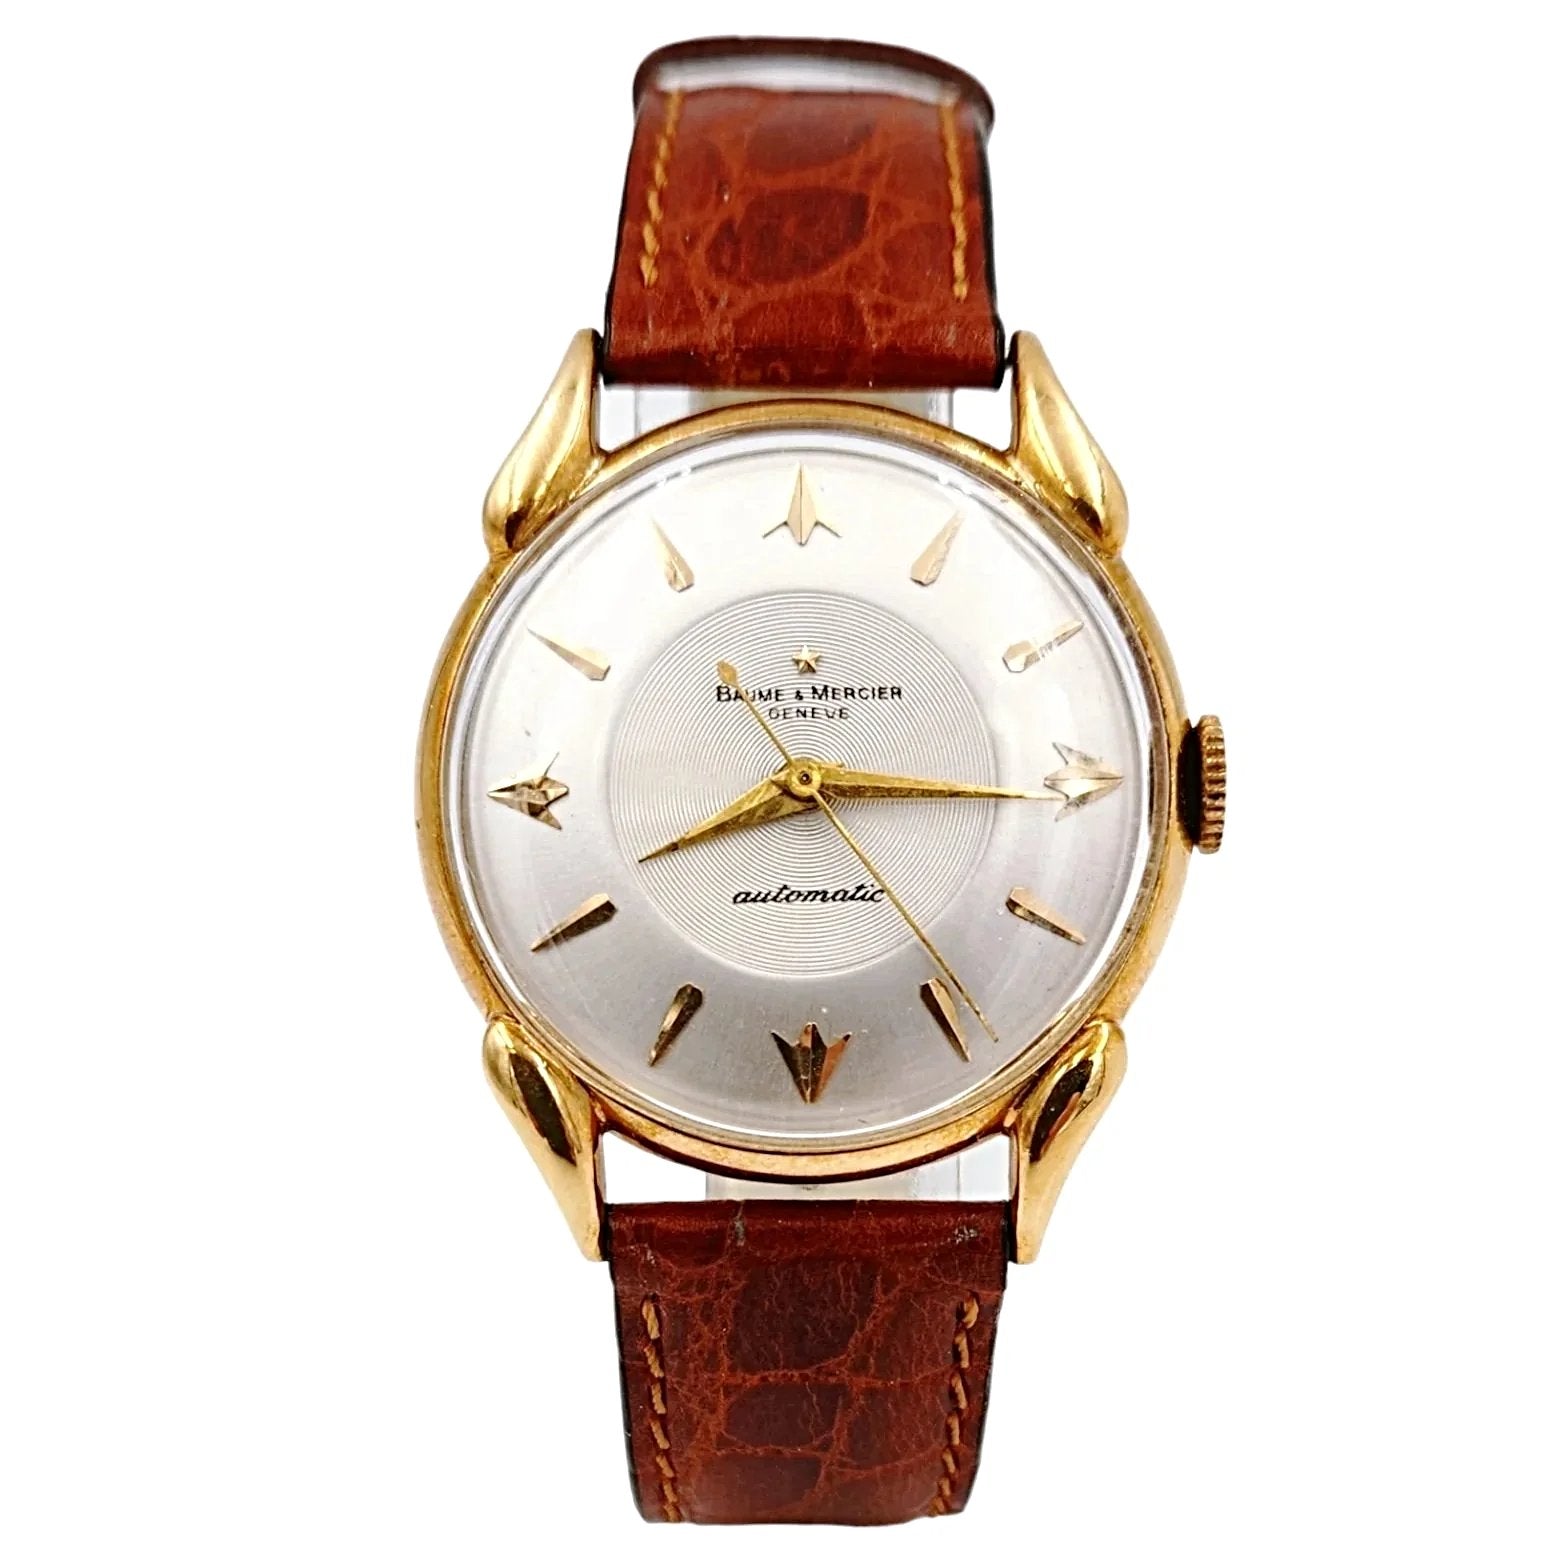 Men's Baume & Mercier 34mm Automatic Vintage 14K Yellow Gold Watch with Brown Leather Band and Silver Dial. (Pre-Owned)